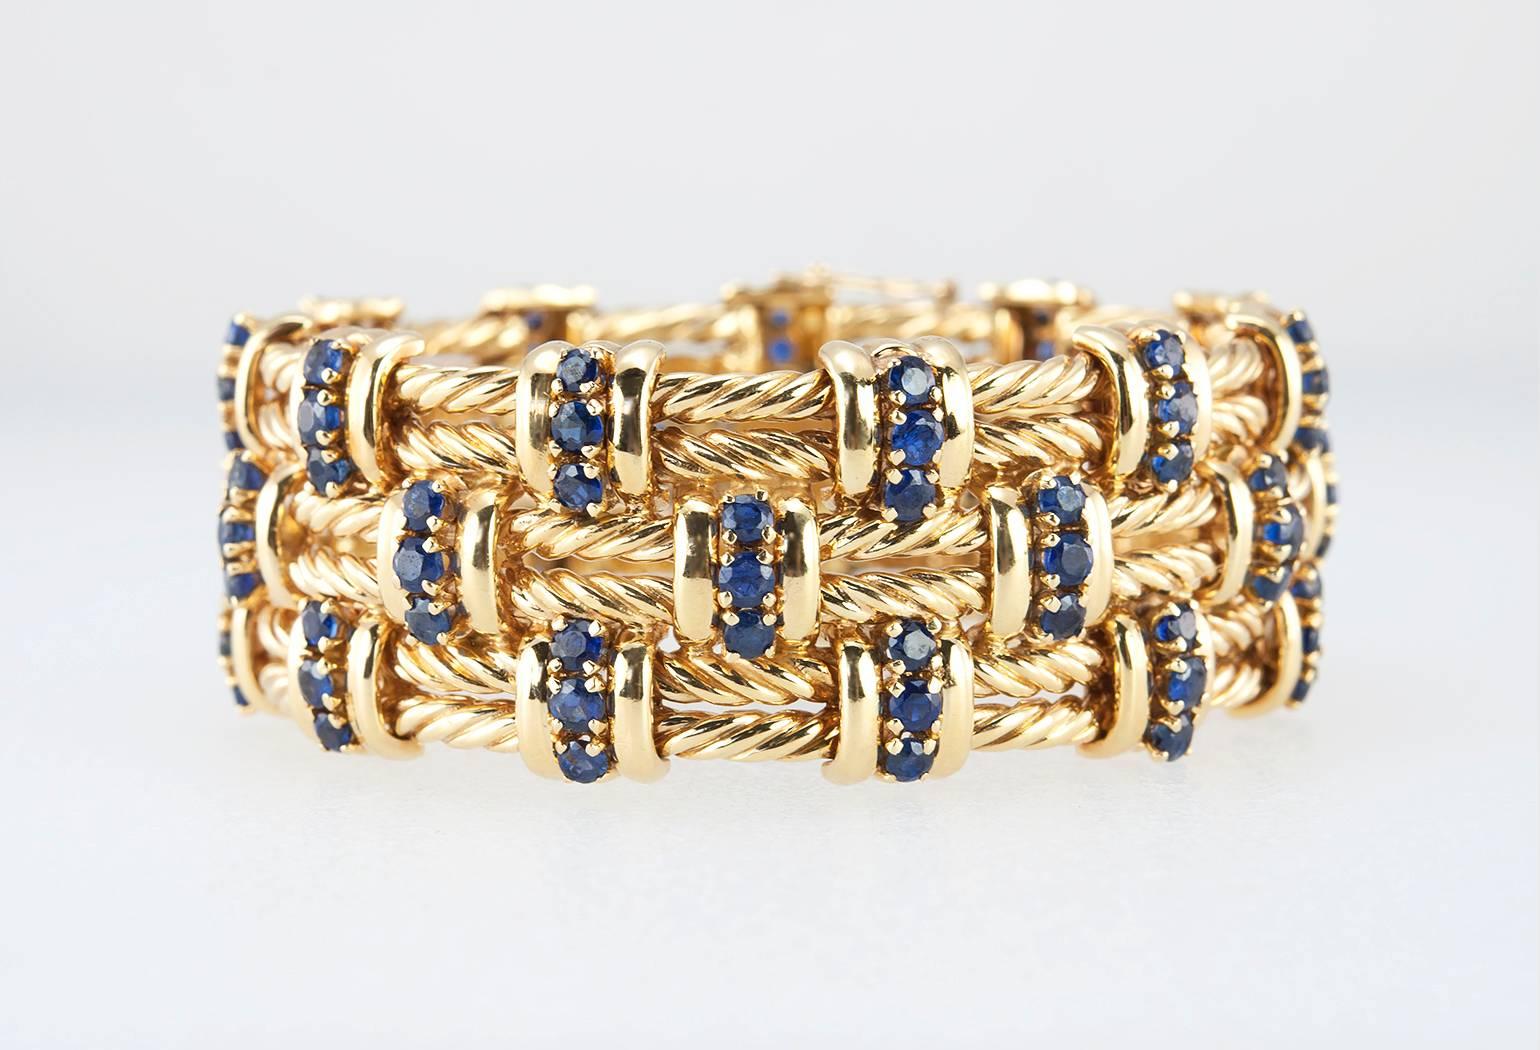 A contemporary, wide sapphire and gold braided link bracelet.  The 99 round sapphires are set in 18 karat yellow gold.  Circa 2000.

The bracelet measures approximately 6.75 inches in length, 0.92 inches wide, and 0.20 inches in depth. 